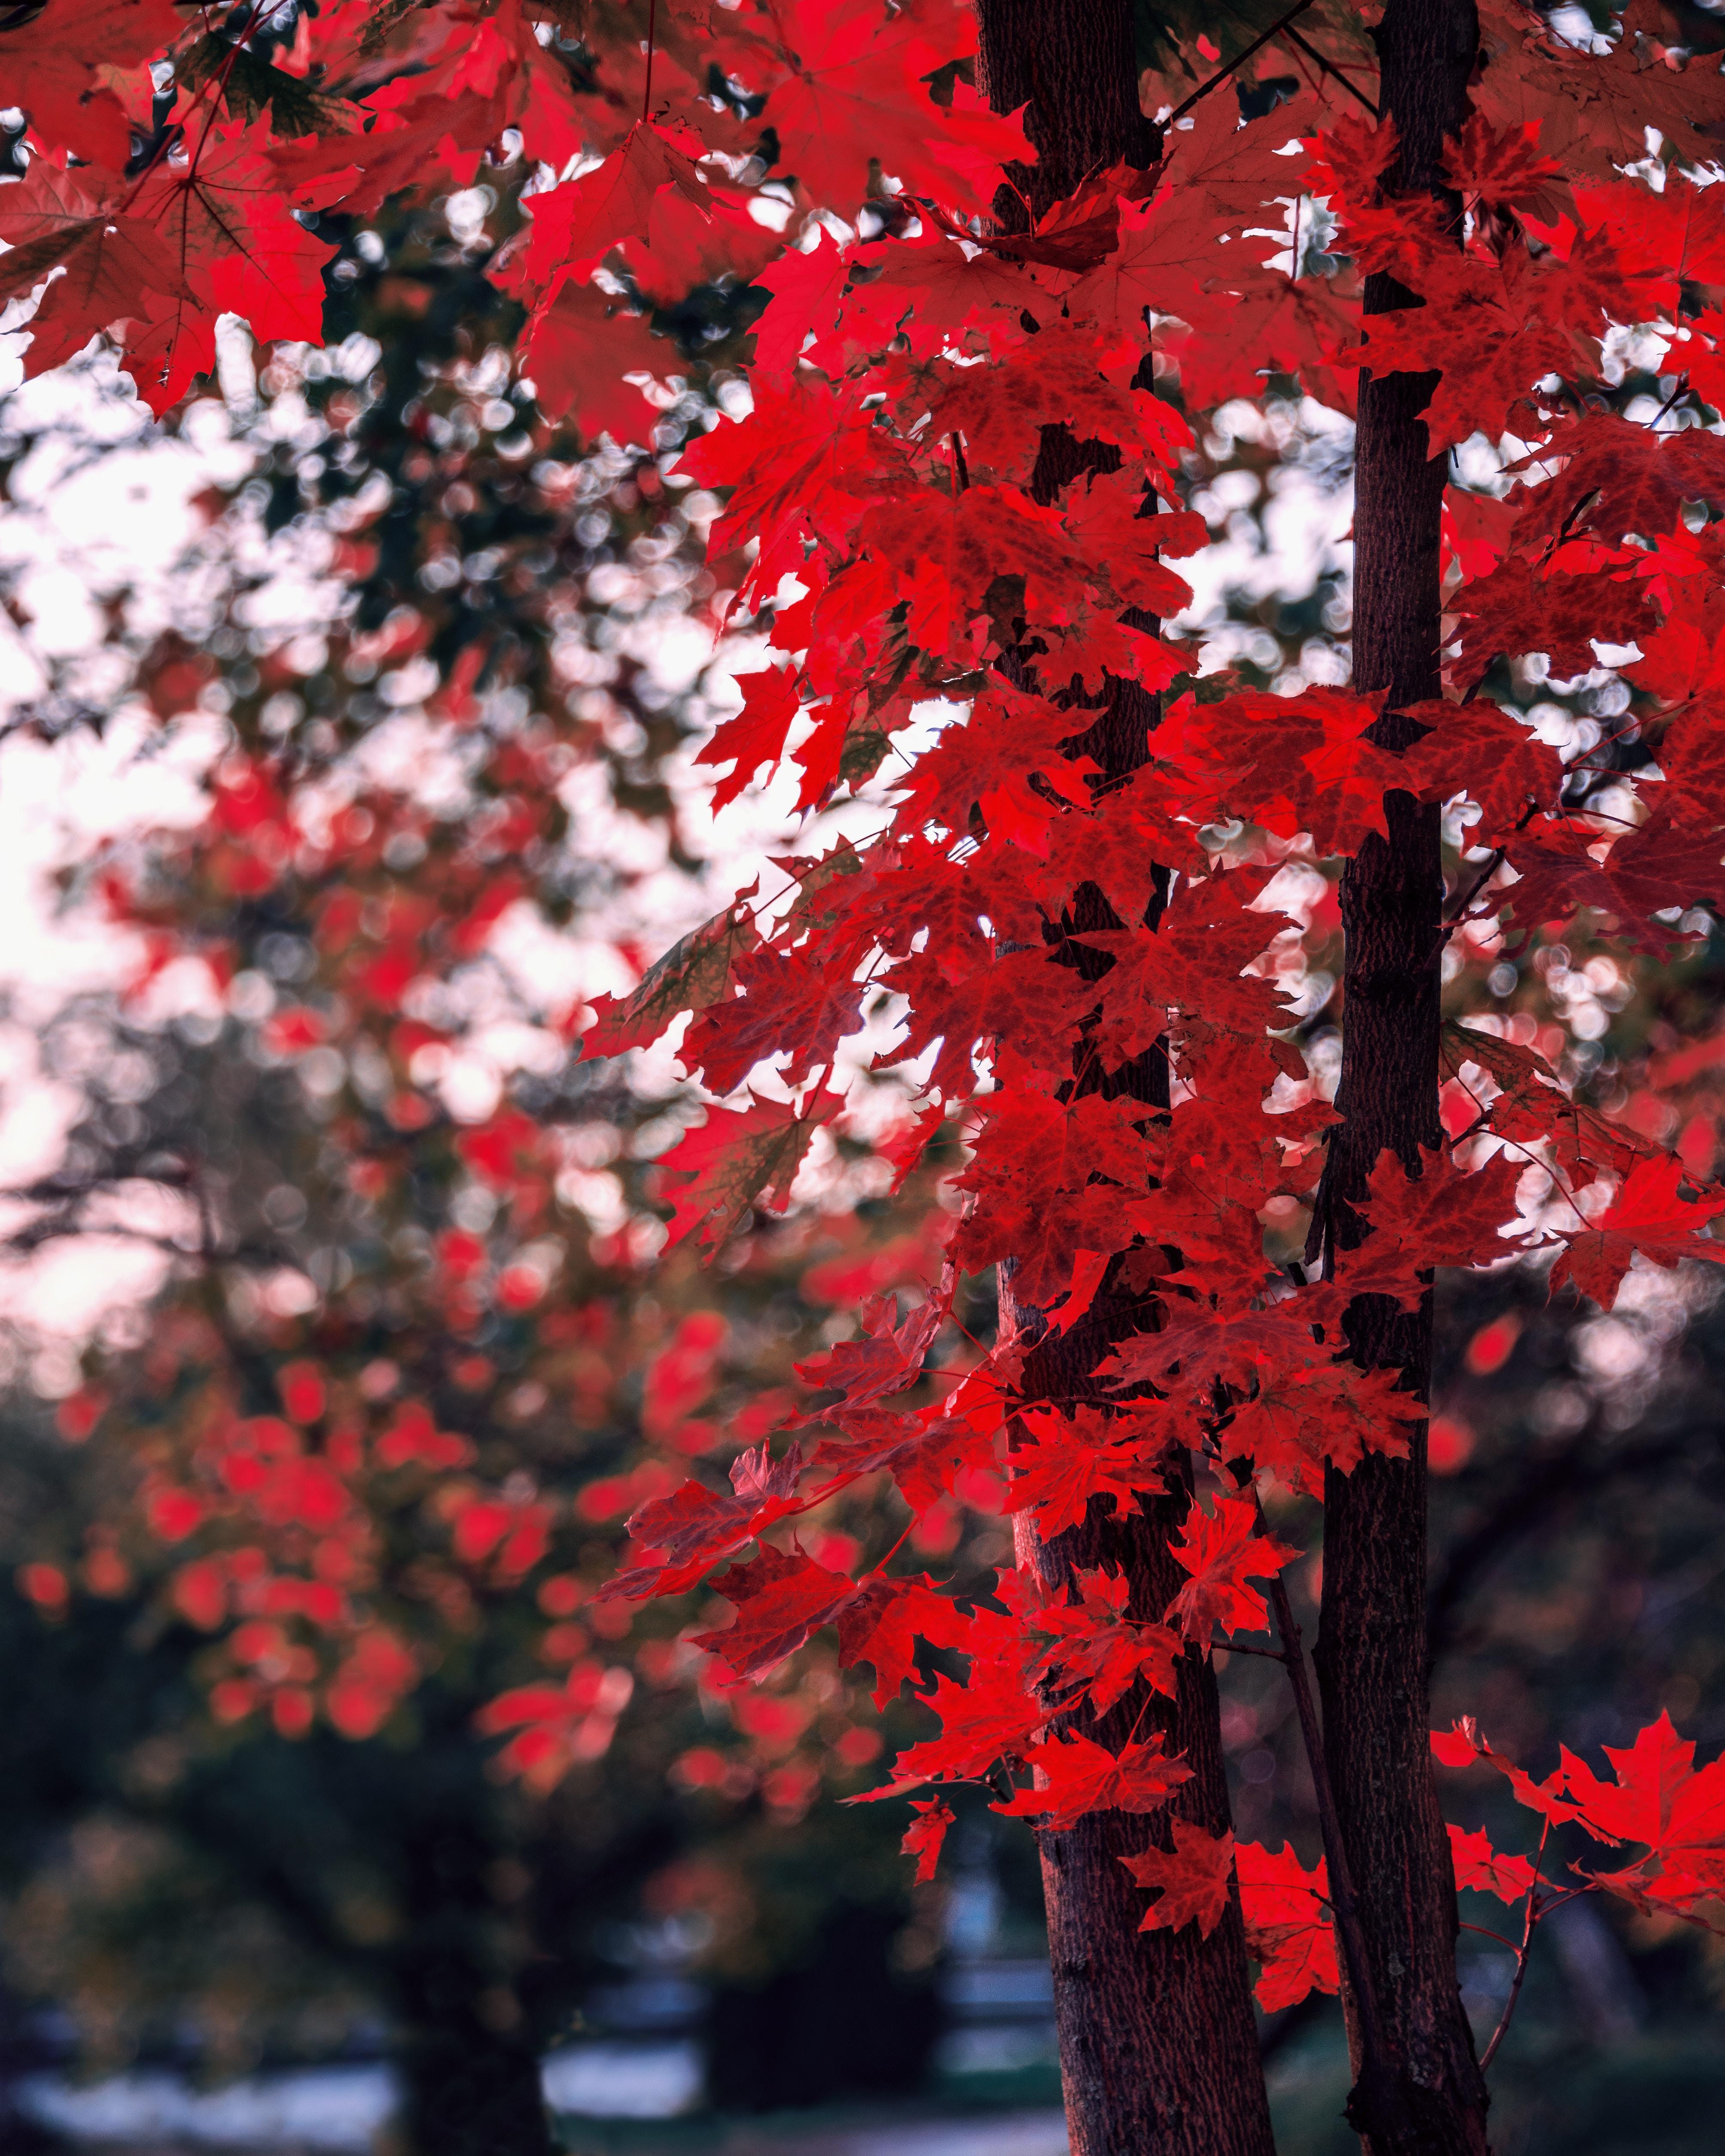 Download wallpaper 4016x5020 maple, leaves, autumn, tree